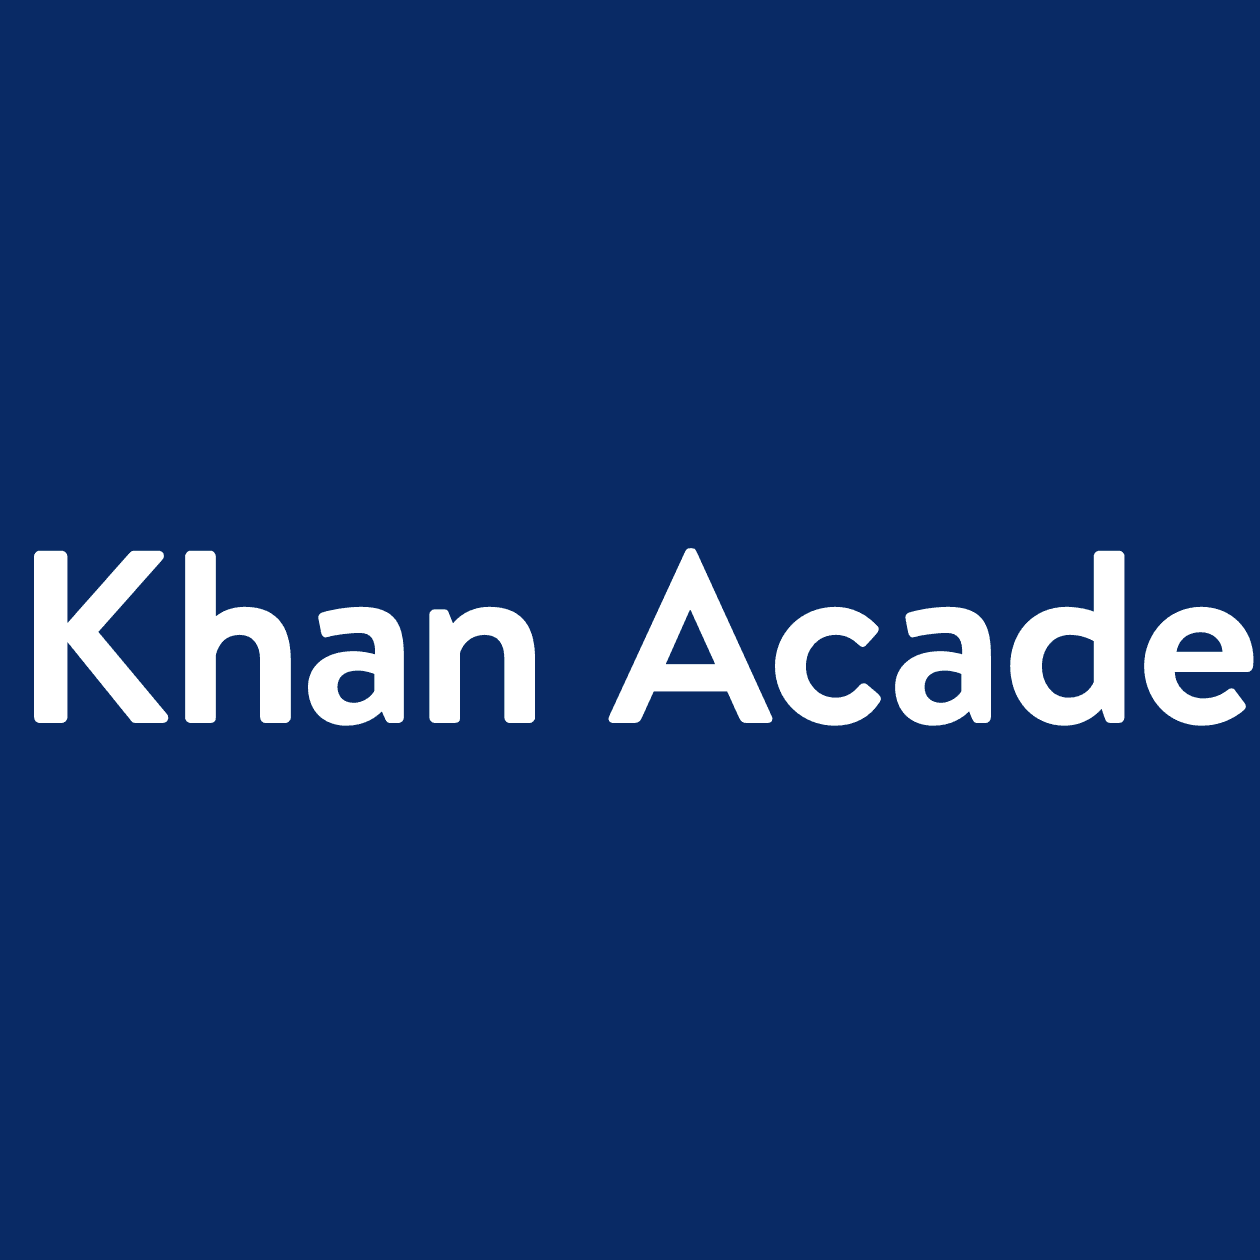 khan academy: learn anything for free